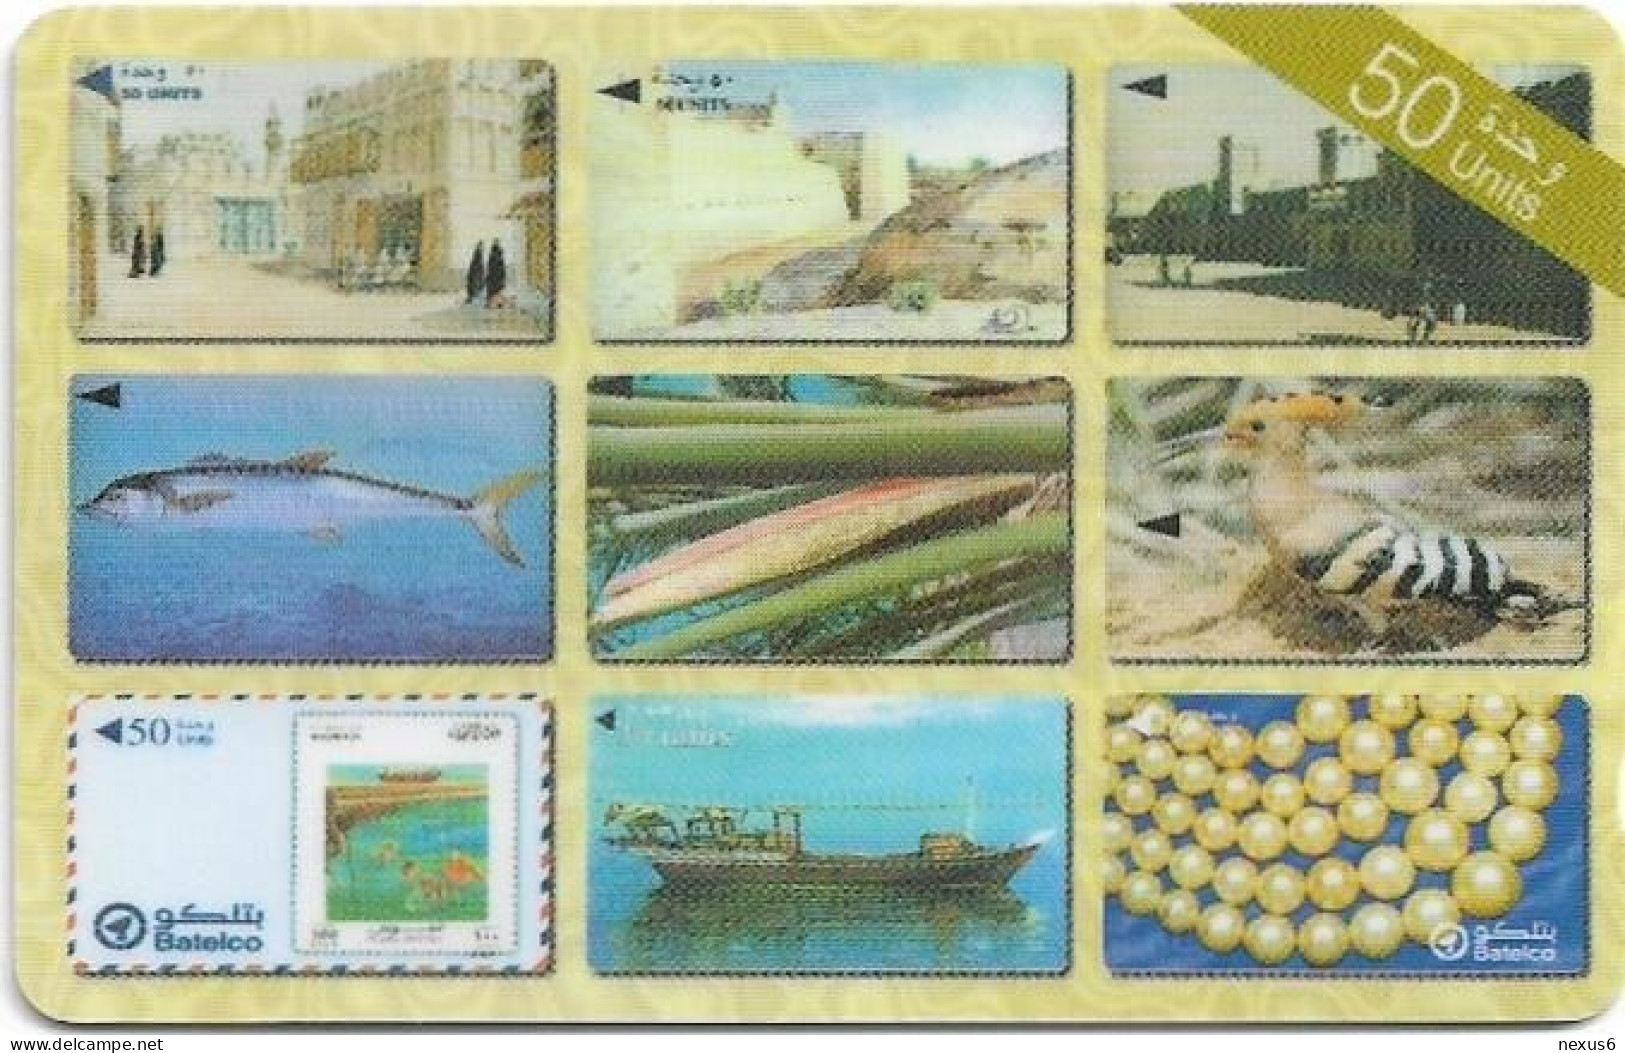 Bahrain - Batelco (GPT) - Collect Bahrain Phonecards 2 - 50BAHW (Normal 0), 2001, 50Units, Used - Bahrain